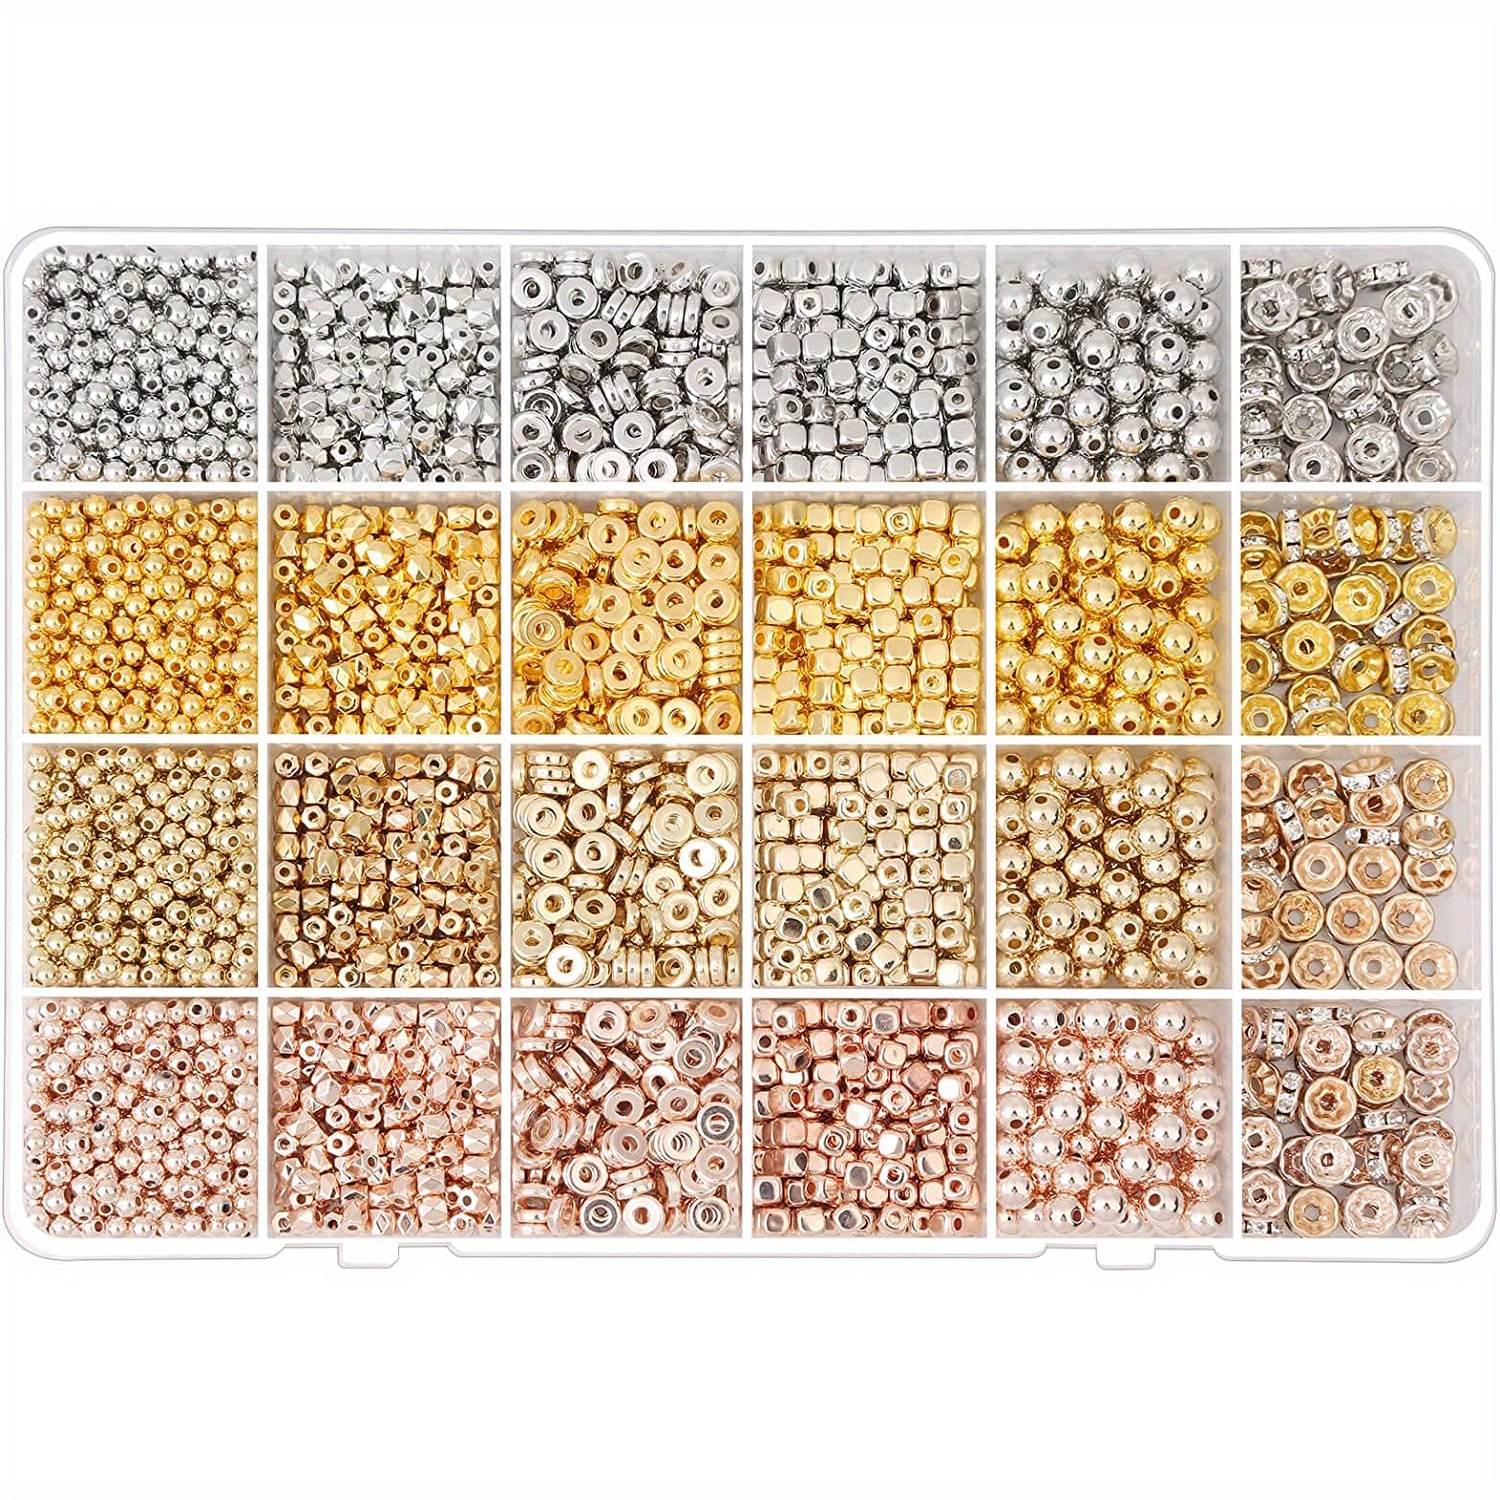 Operitacx 950pcs Cube Loose Spacer Beads Big Beads for Bracelets Making  Beading Mats for Jewelry Making Cross Beads for Bracelets Making Crystal  Cube